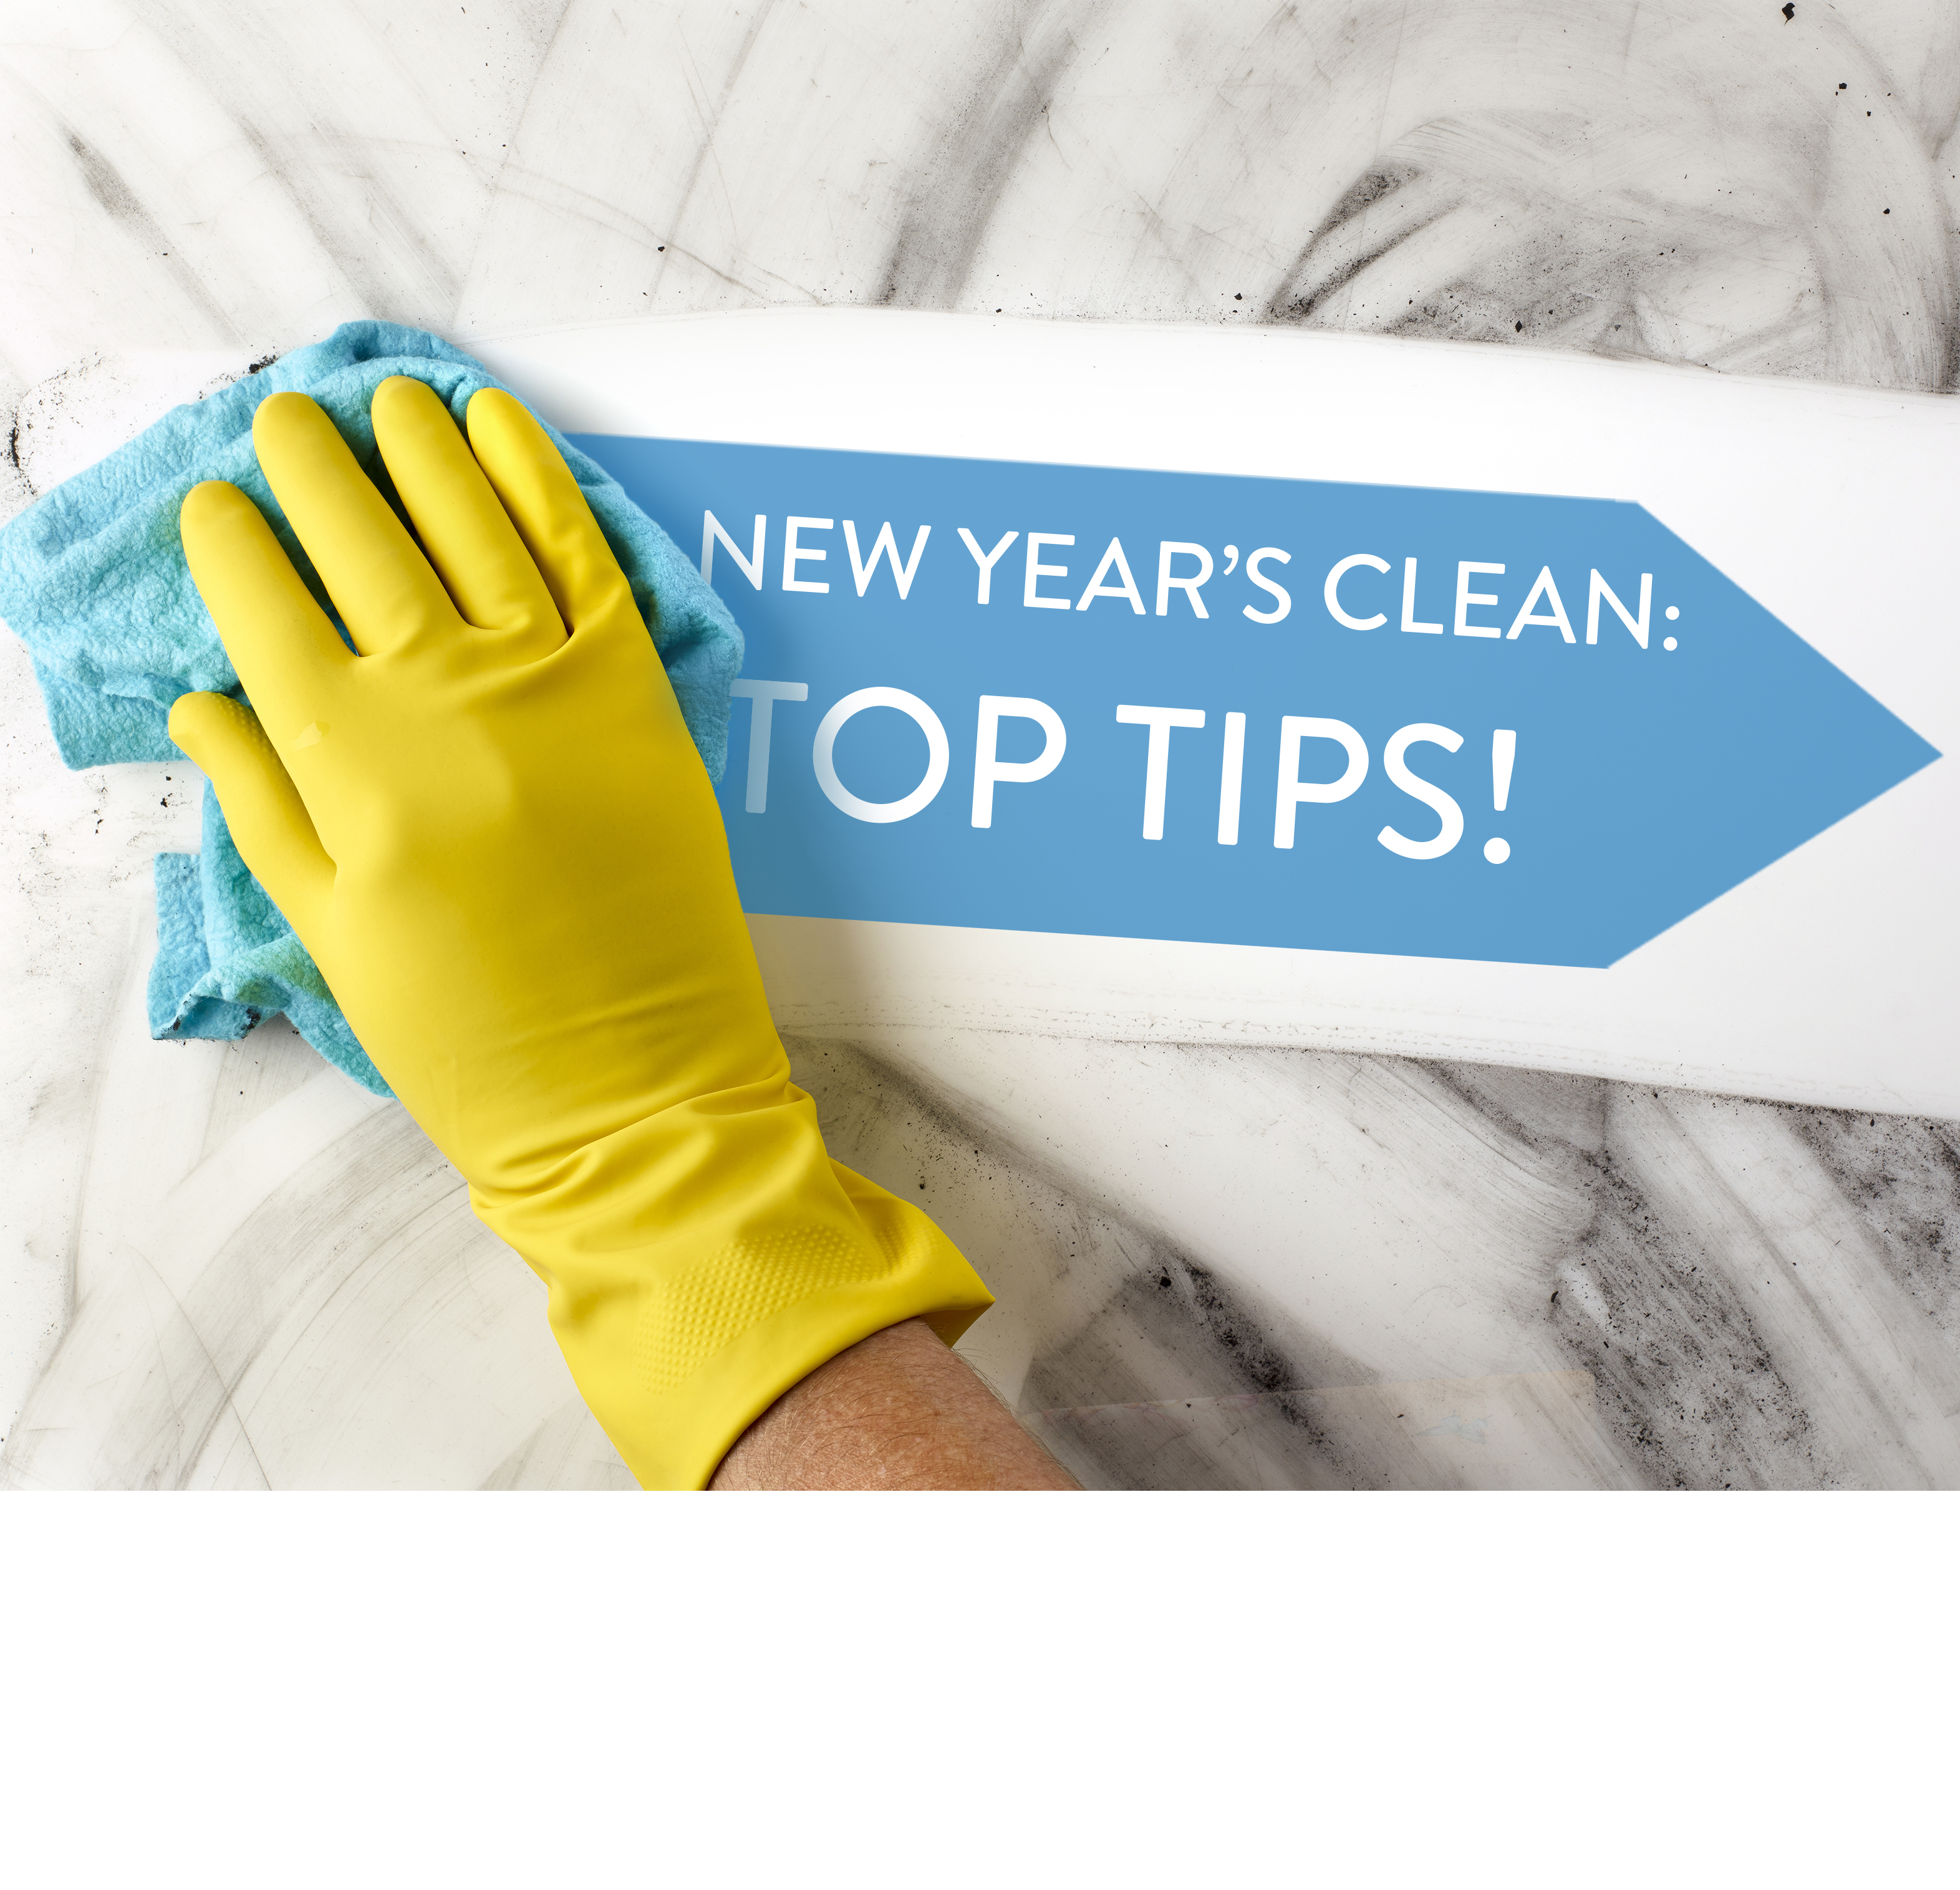 New Year's Clean: Top Tips